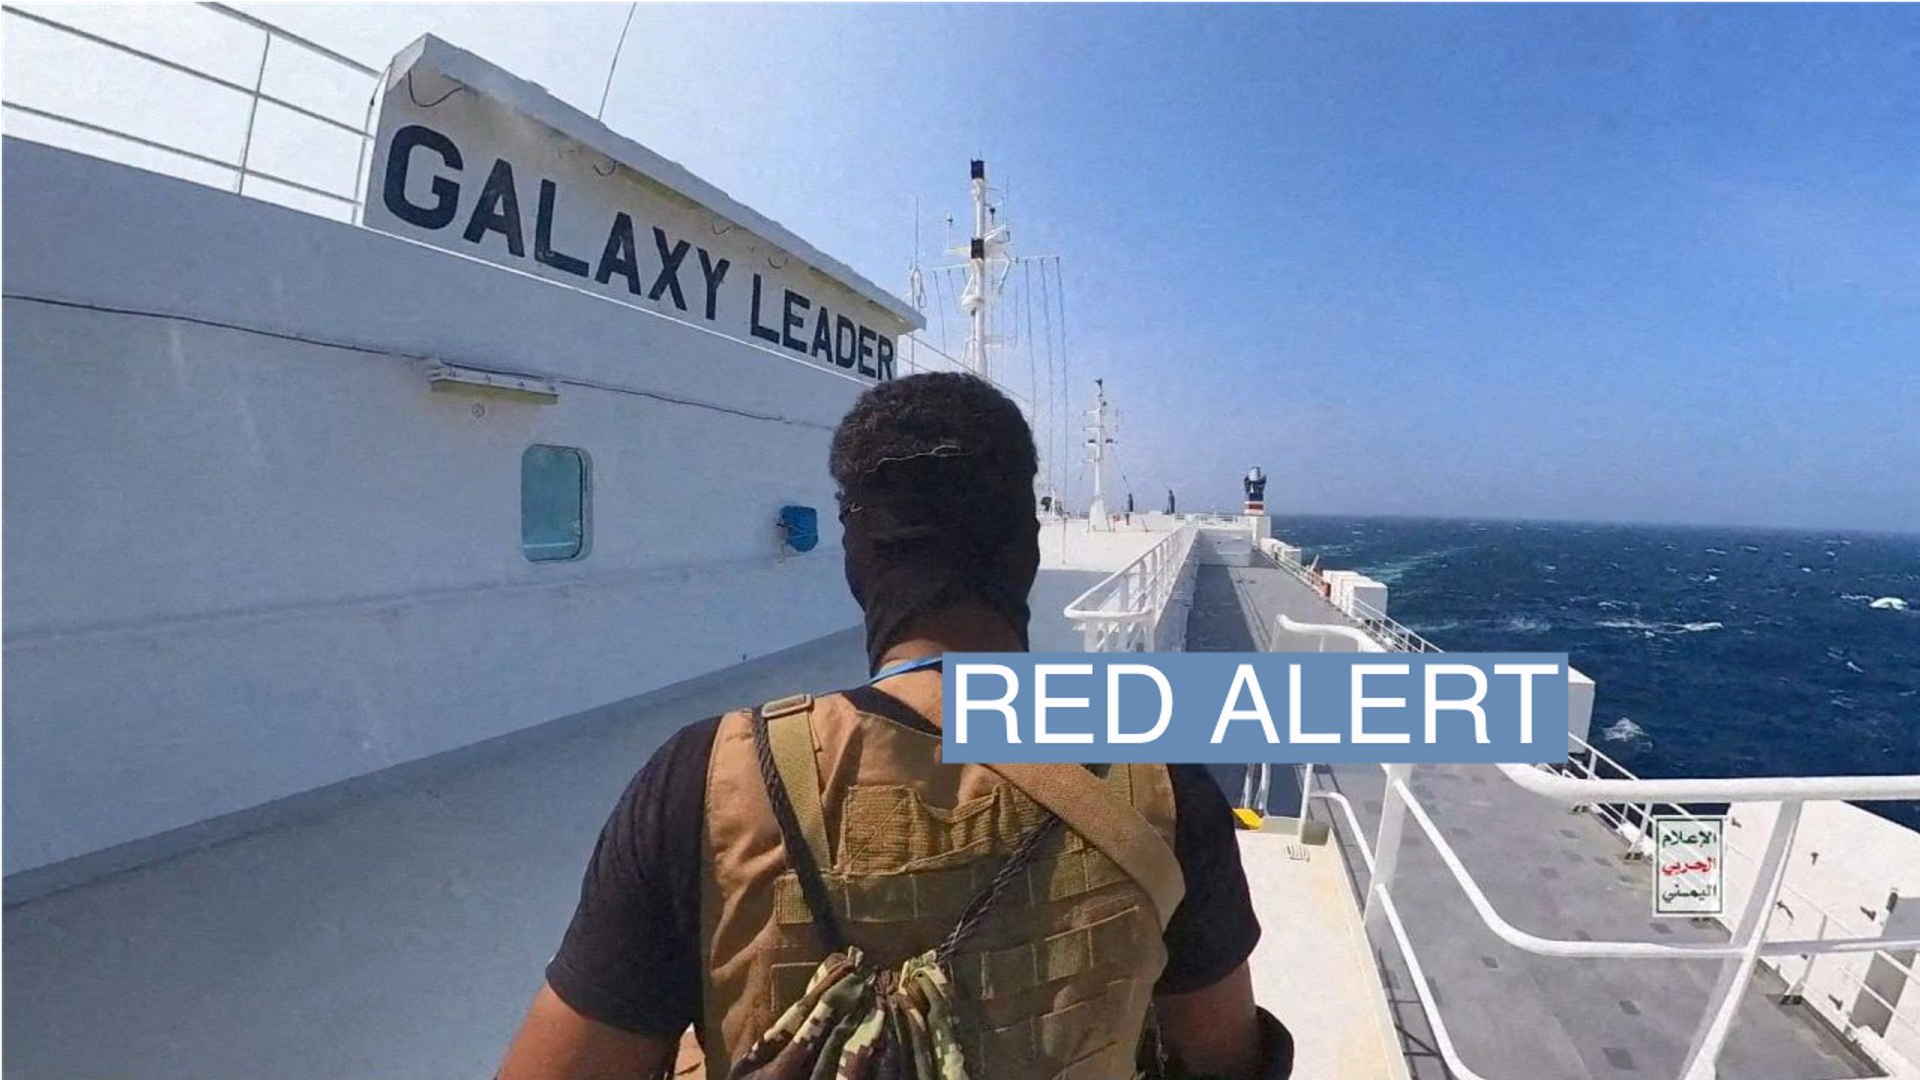  A Houthi fighter stands on the Galaxy Leader cargo ship in the Red Sea in this photo released November 20, 2023